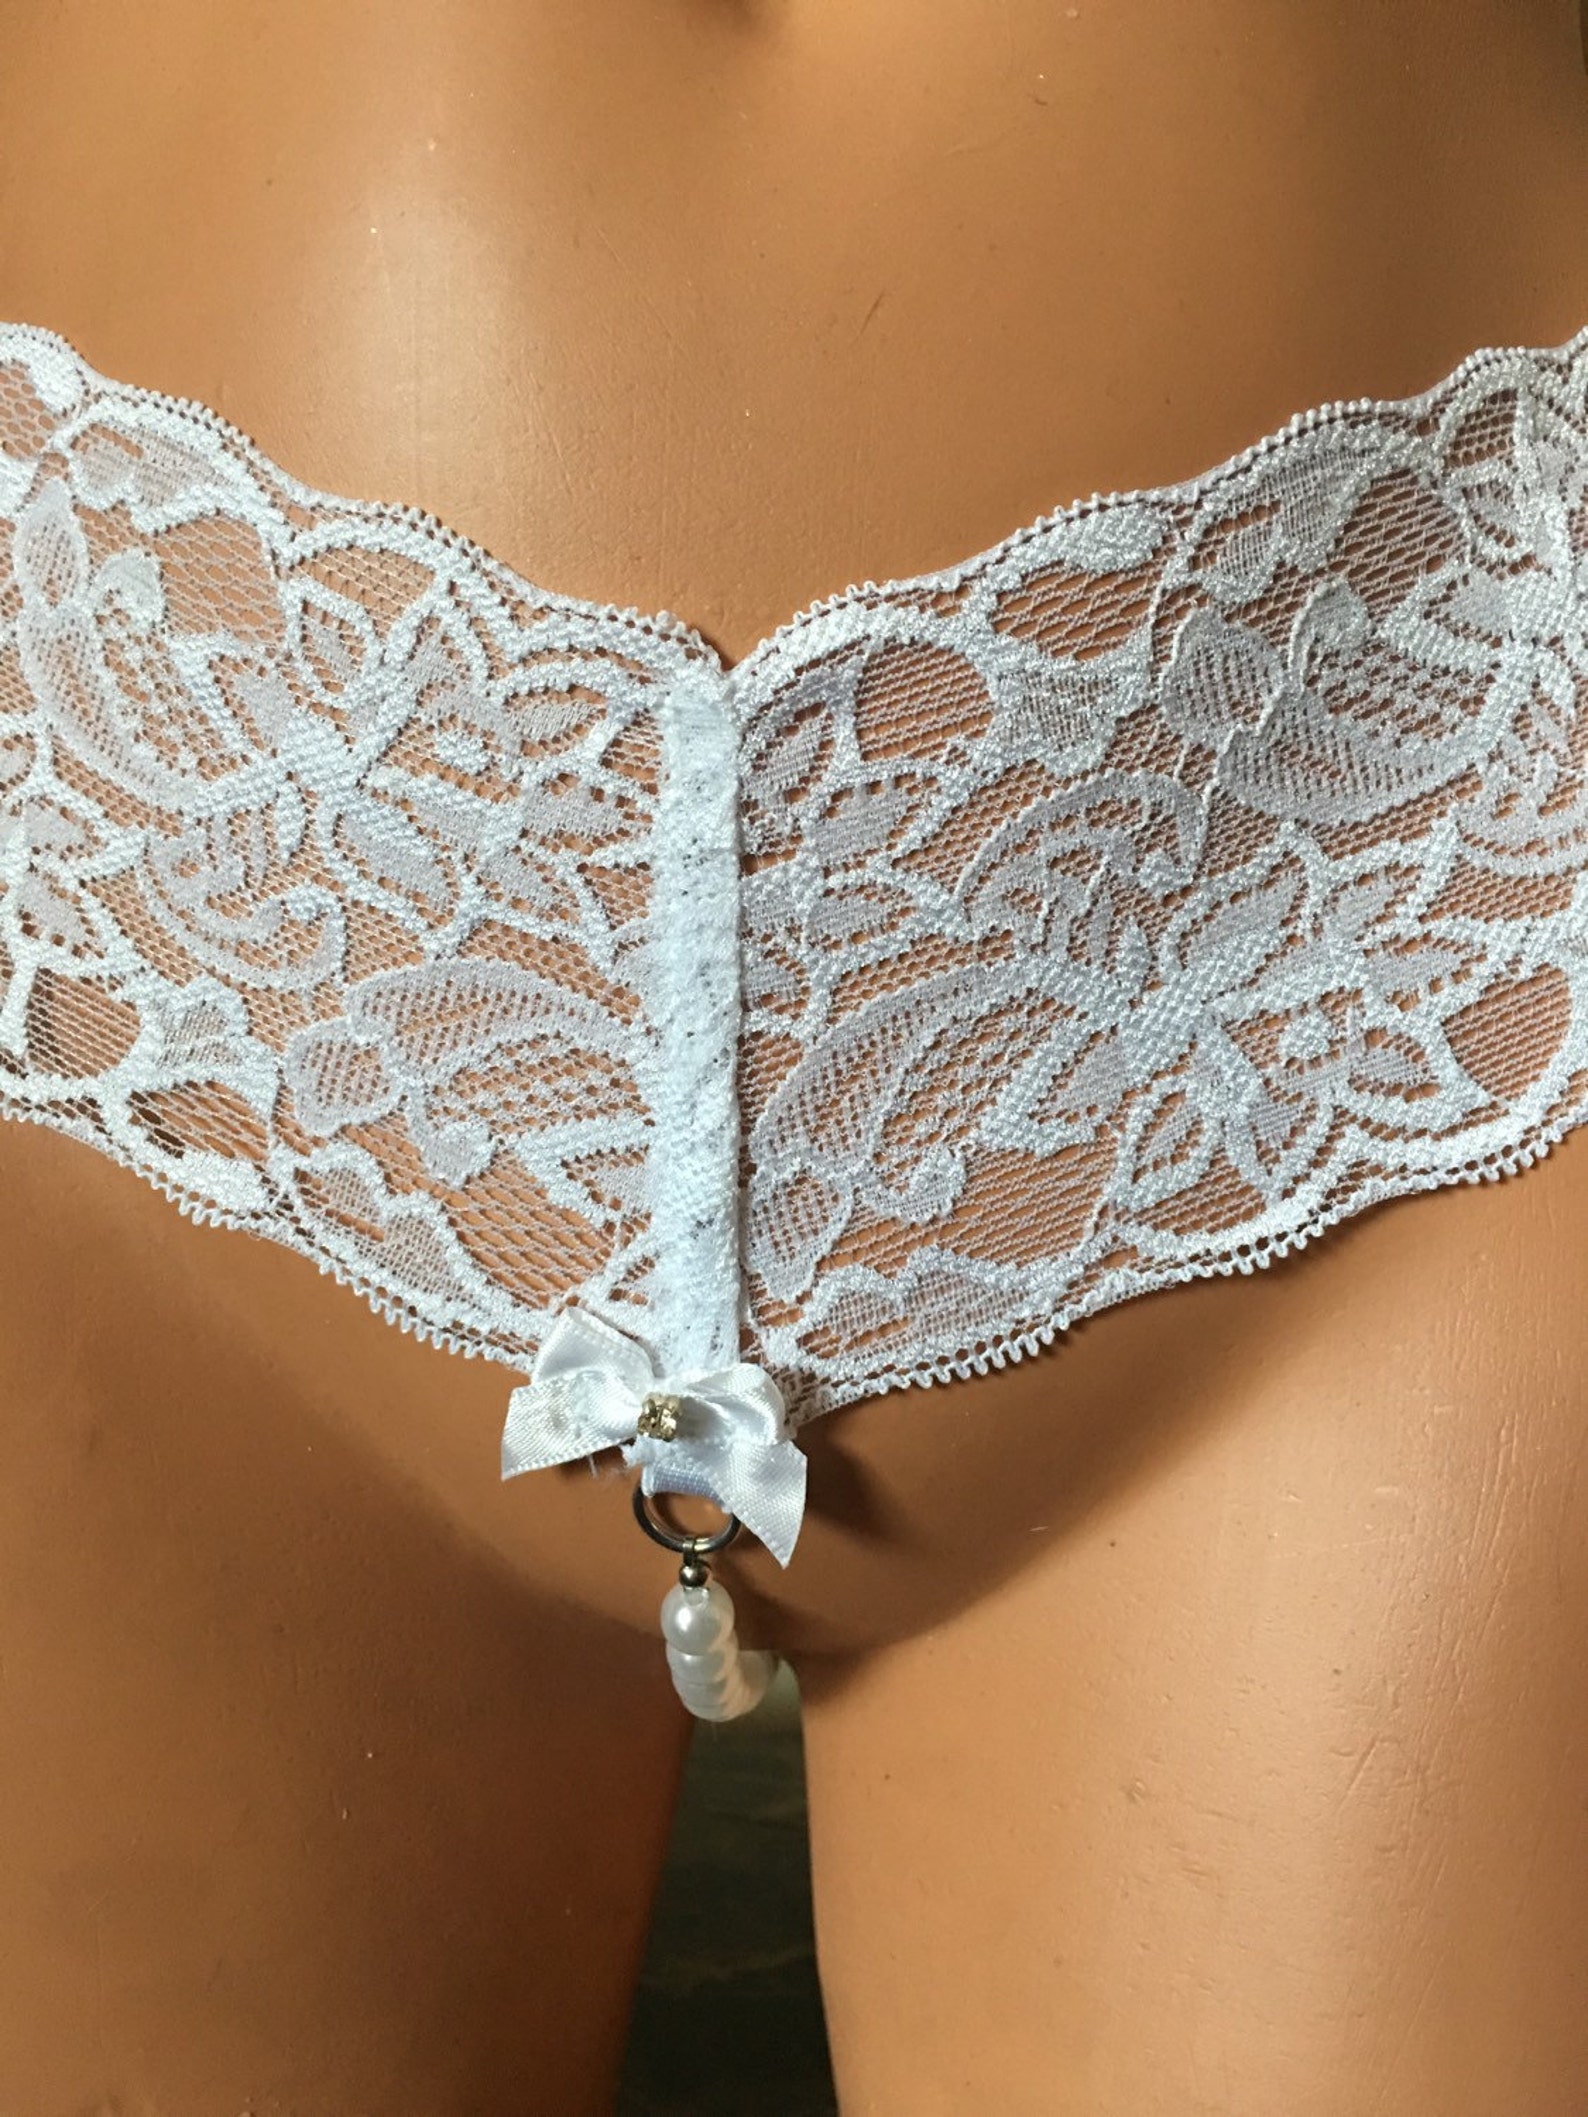 Crotchless Panties With Pearls And Lace Perfect Wedding Etsy Uk